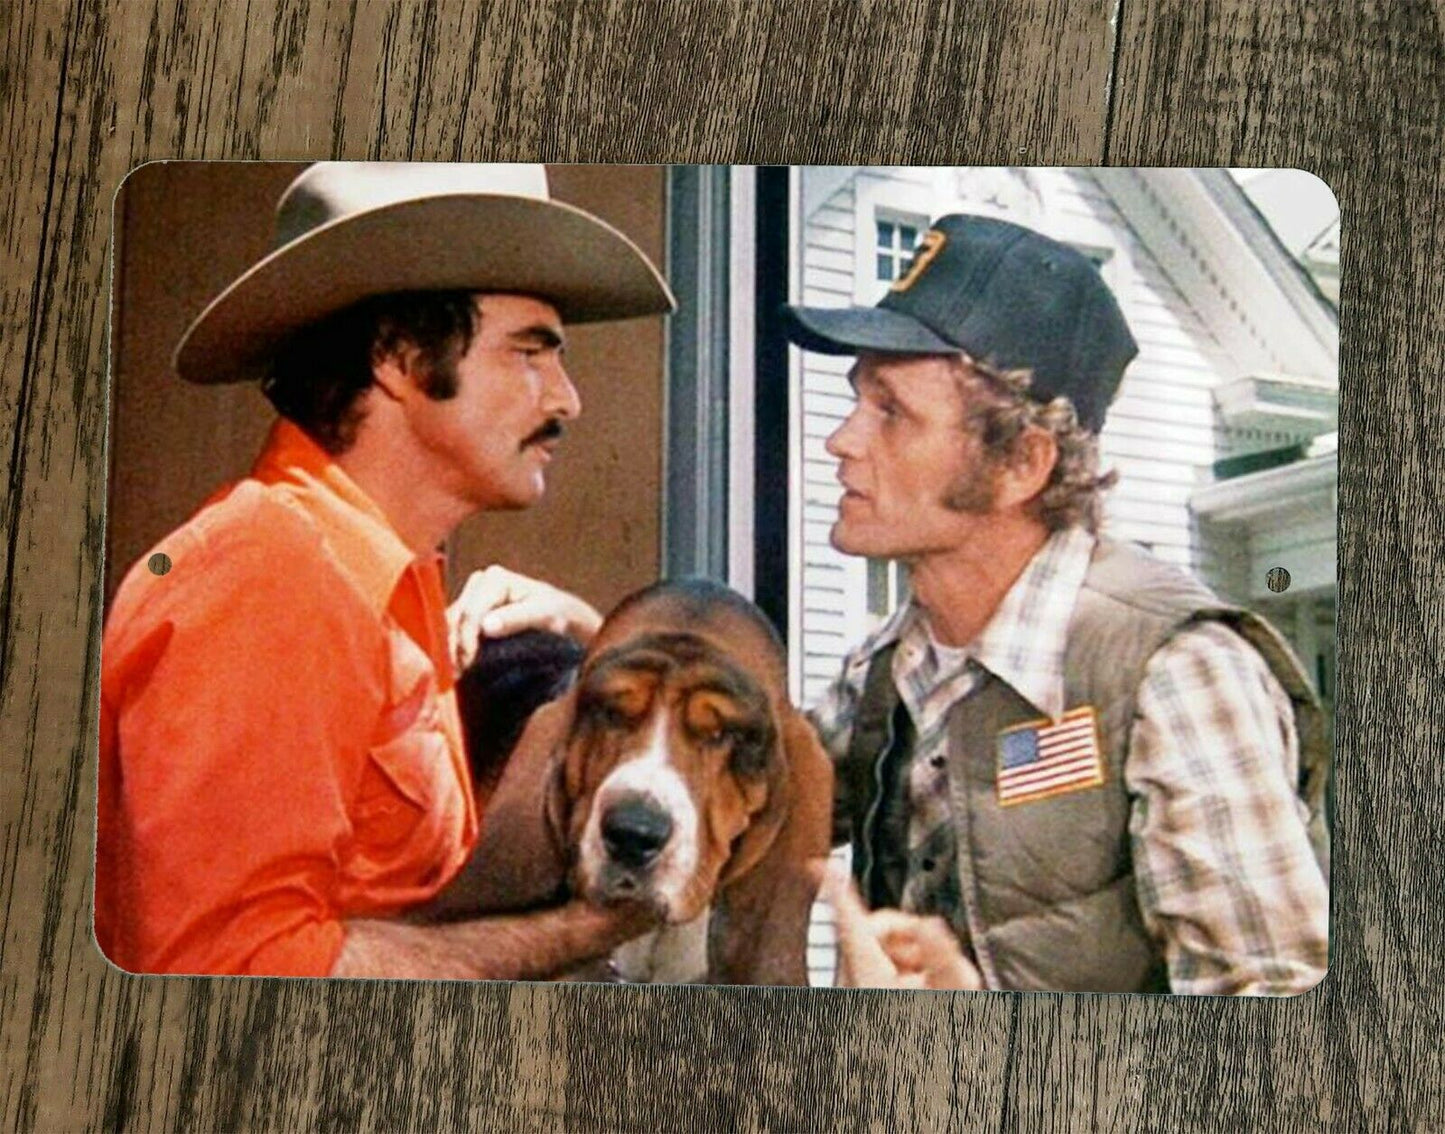 Burt Reynolds Smokey and the Bandit with Dog 8x12 Metal Wall Sign Action Movie Poster